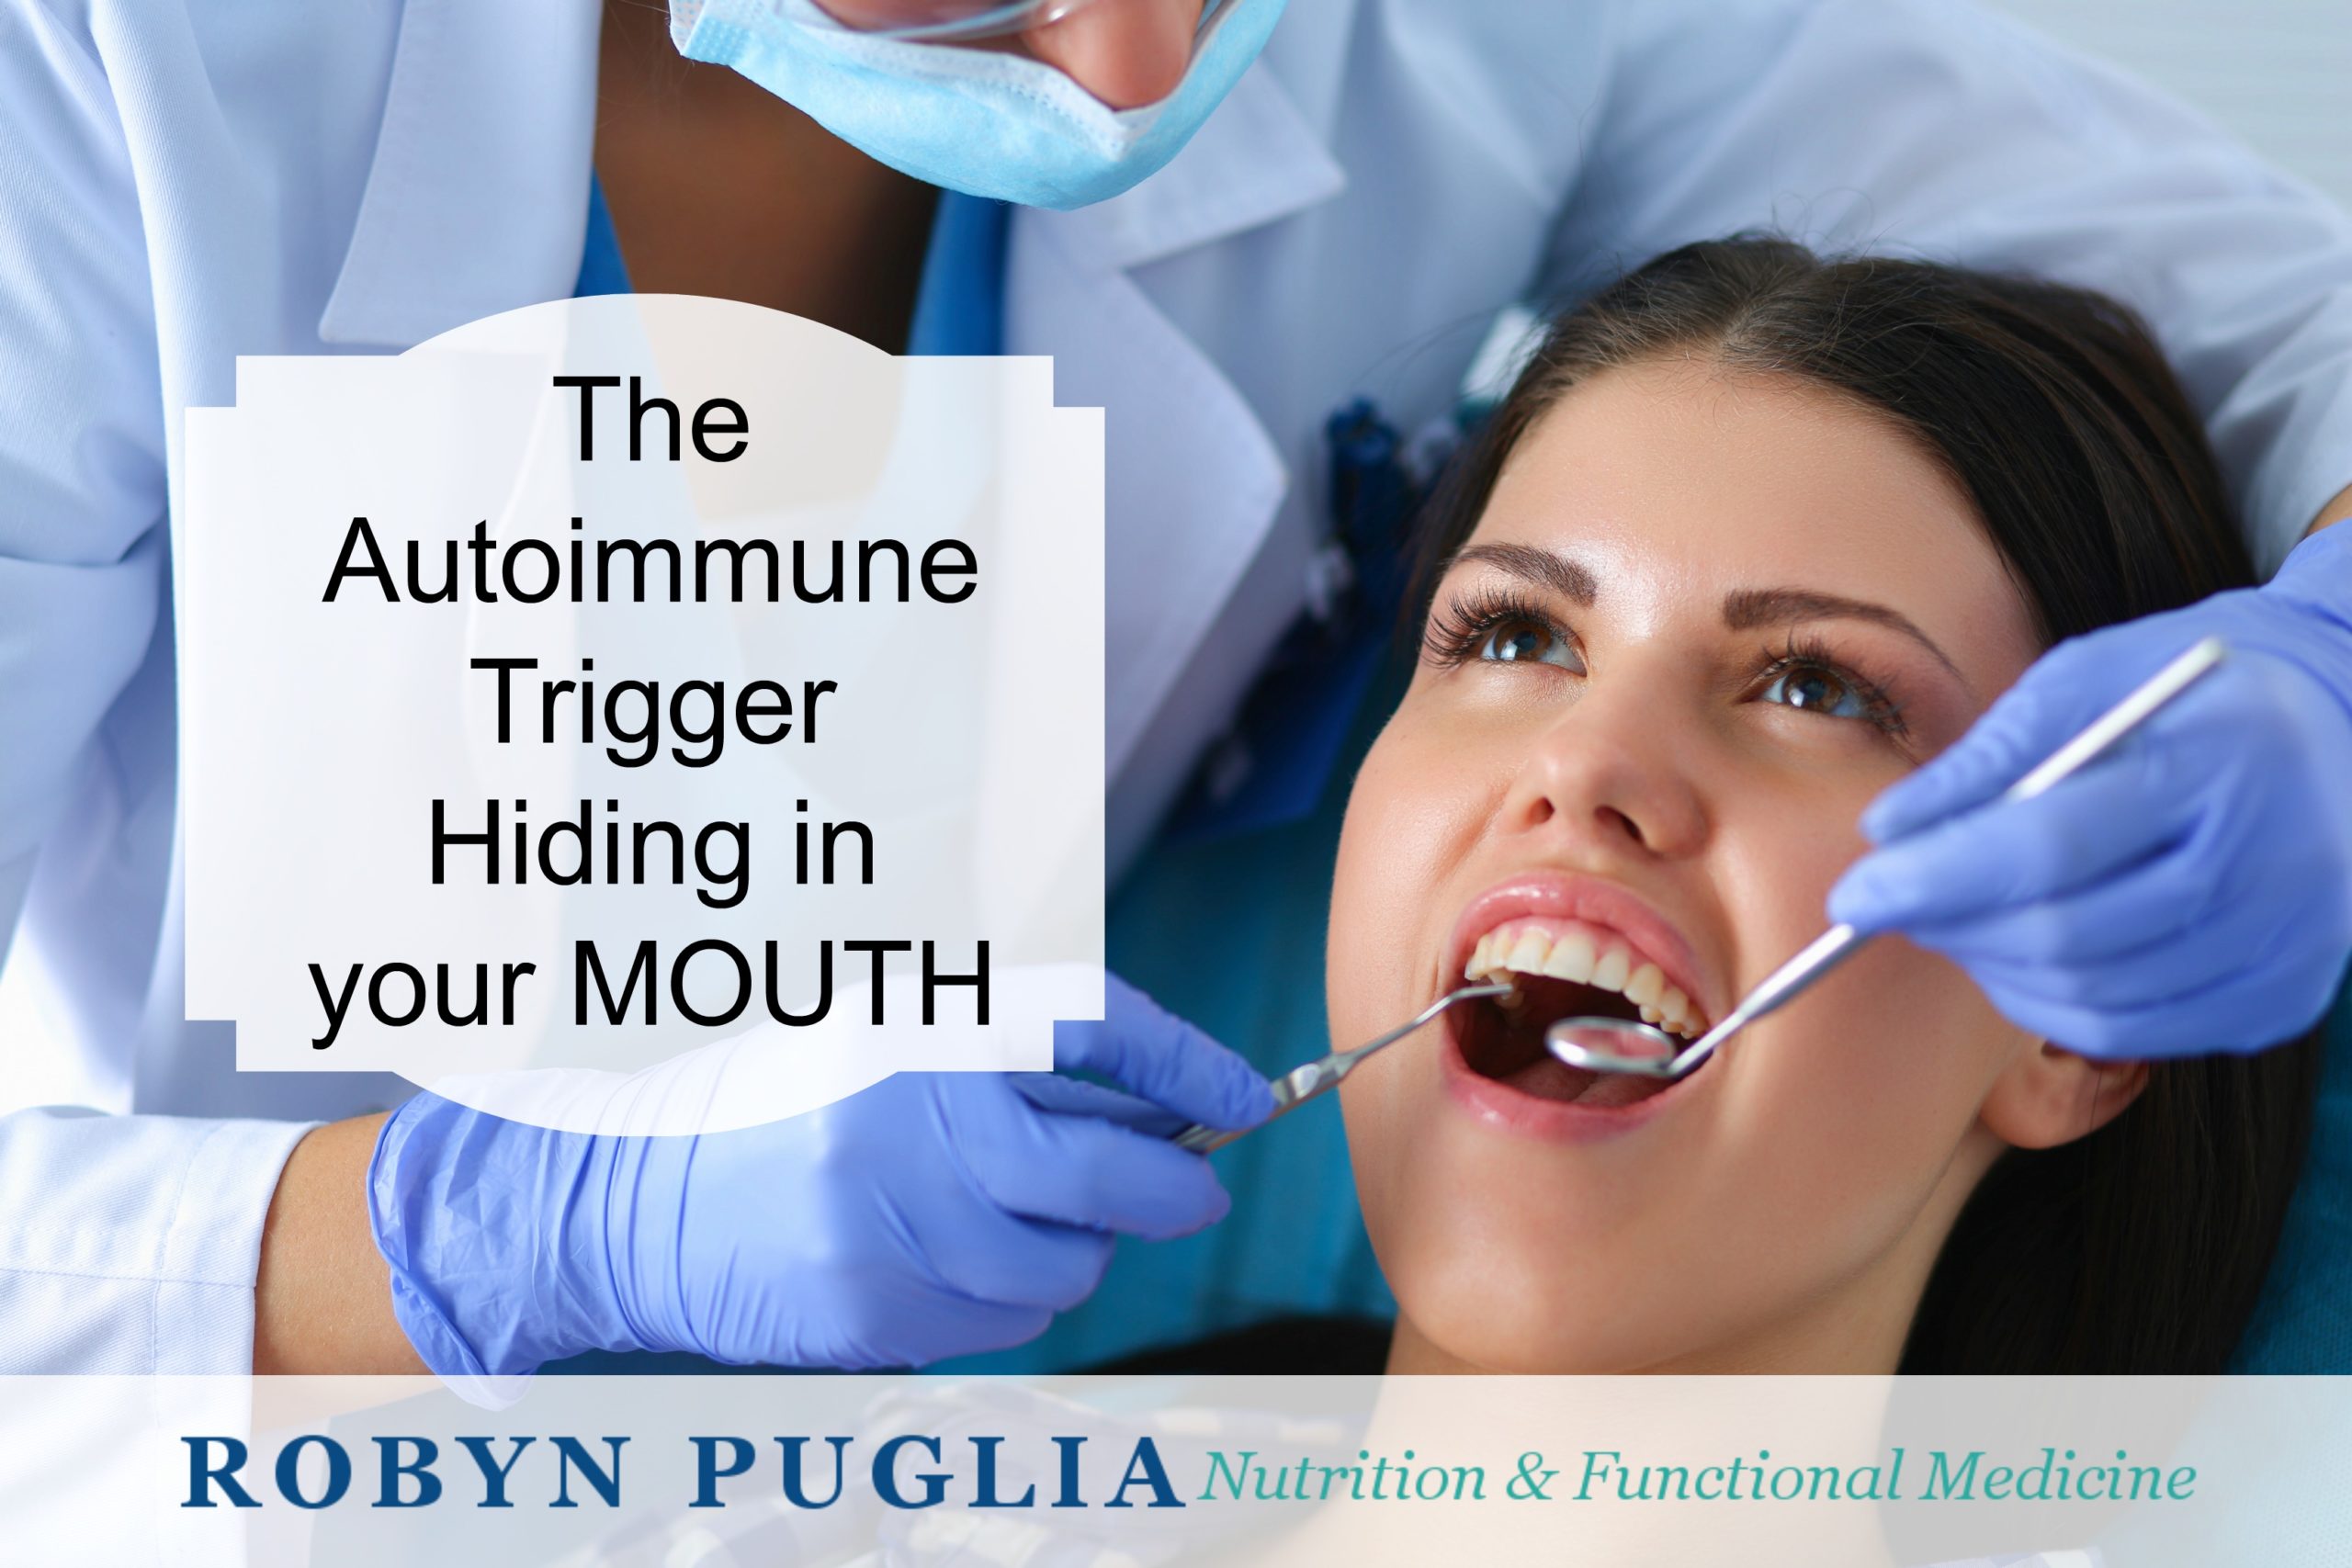 Autoimmune Trigger in the Mouth